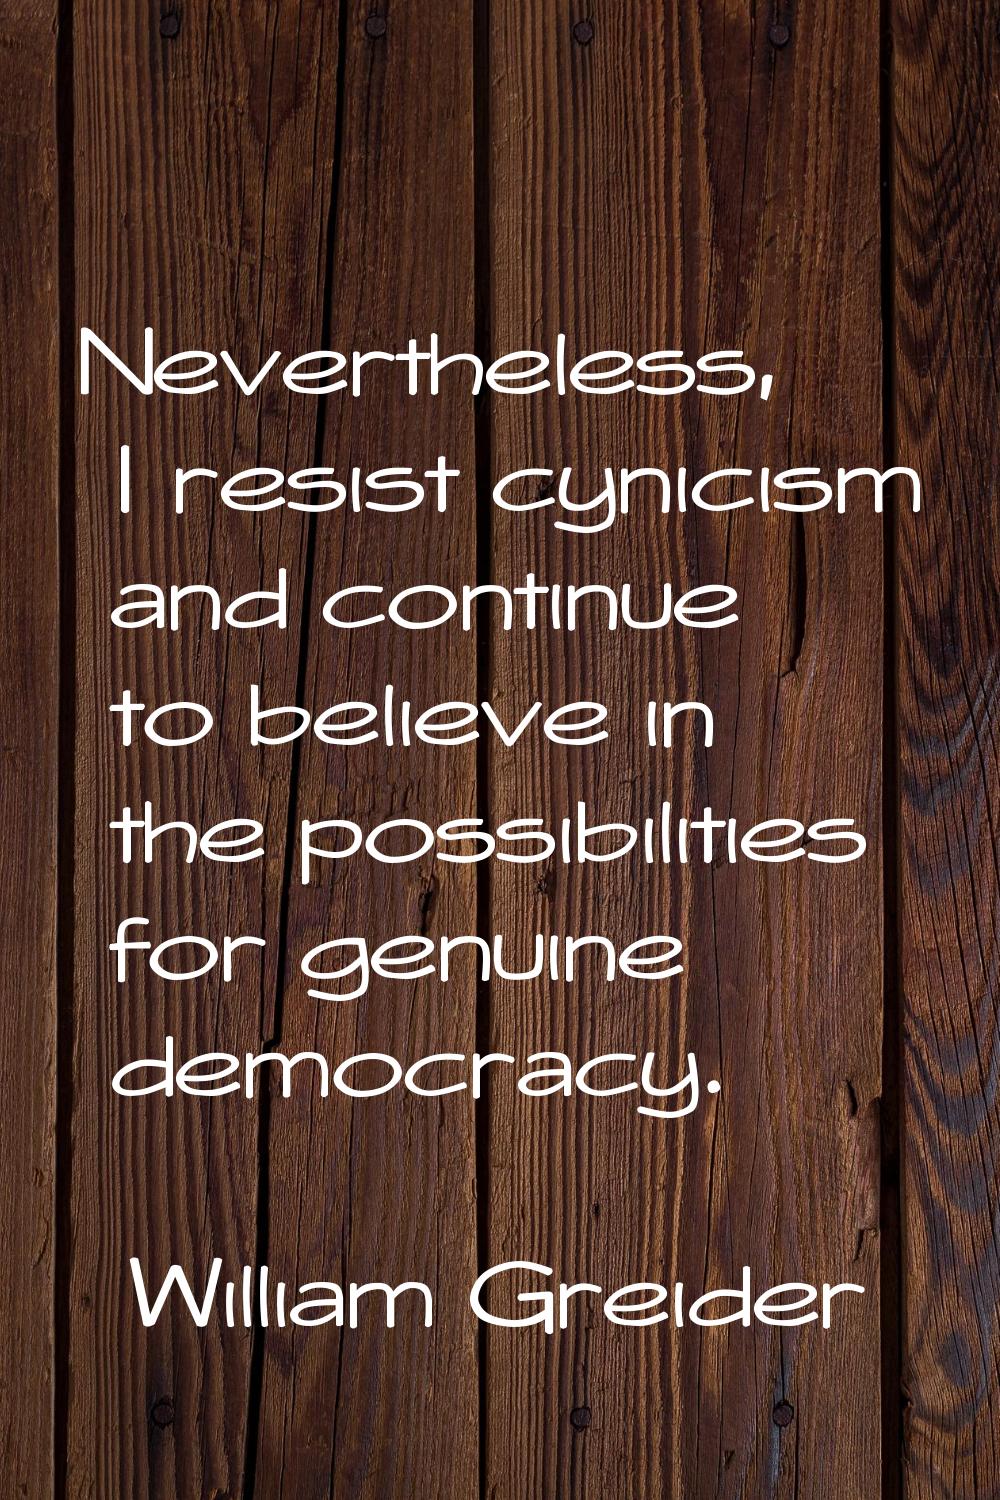 Nevertheless, I resist cynicism and continue to believe in the possibilities for genuine democracy.